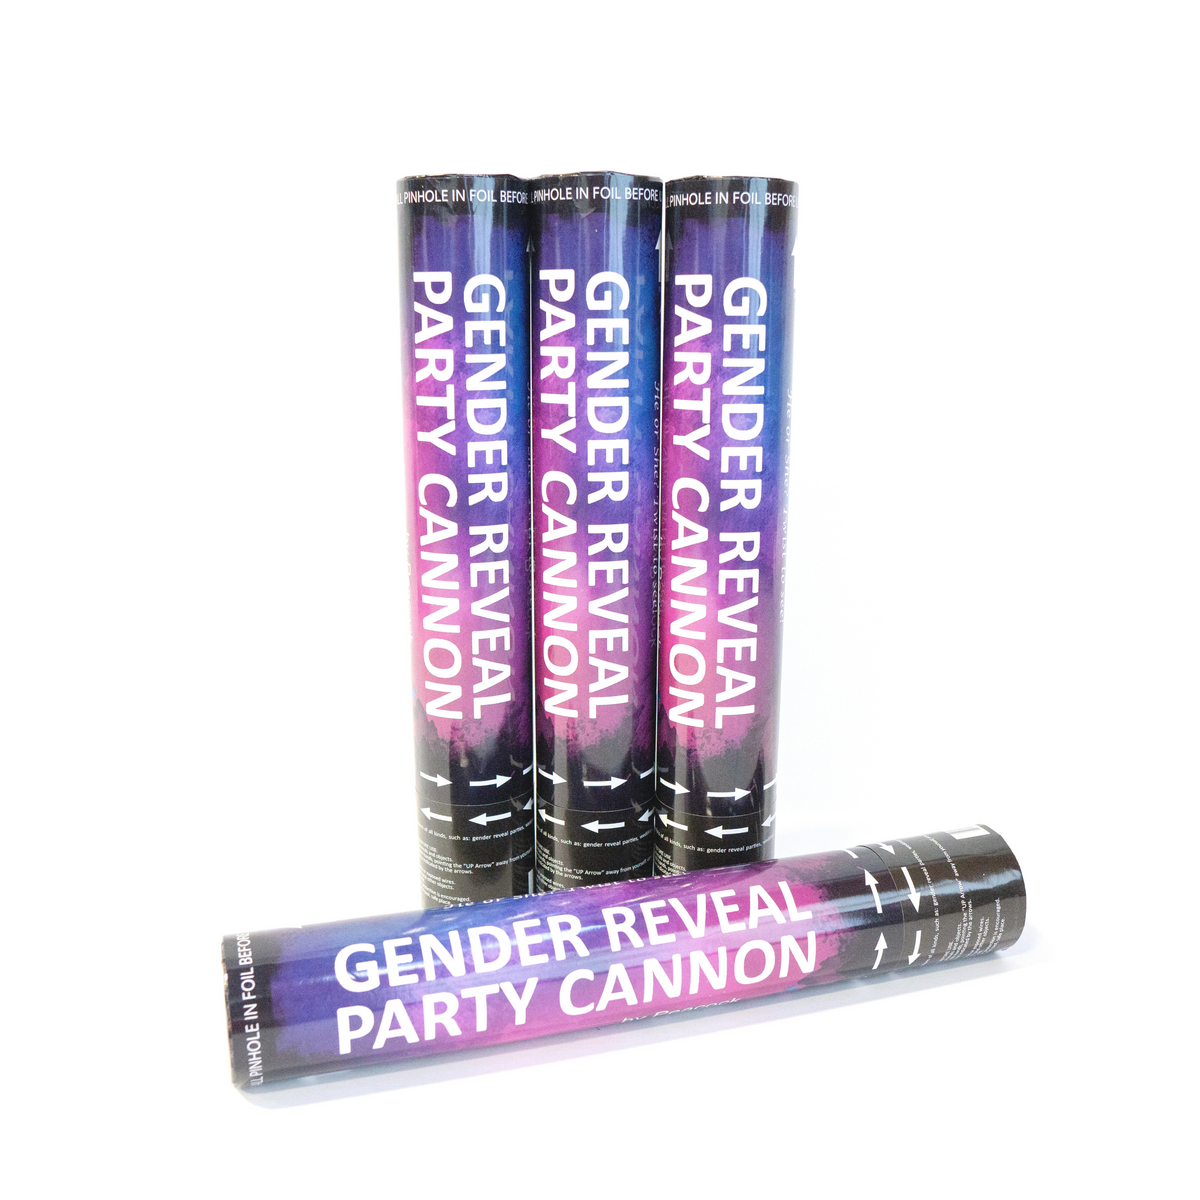 24 Gender Reveal Party Cannon - Powder and Confetti